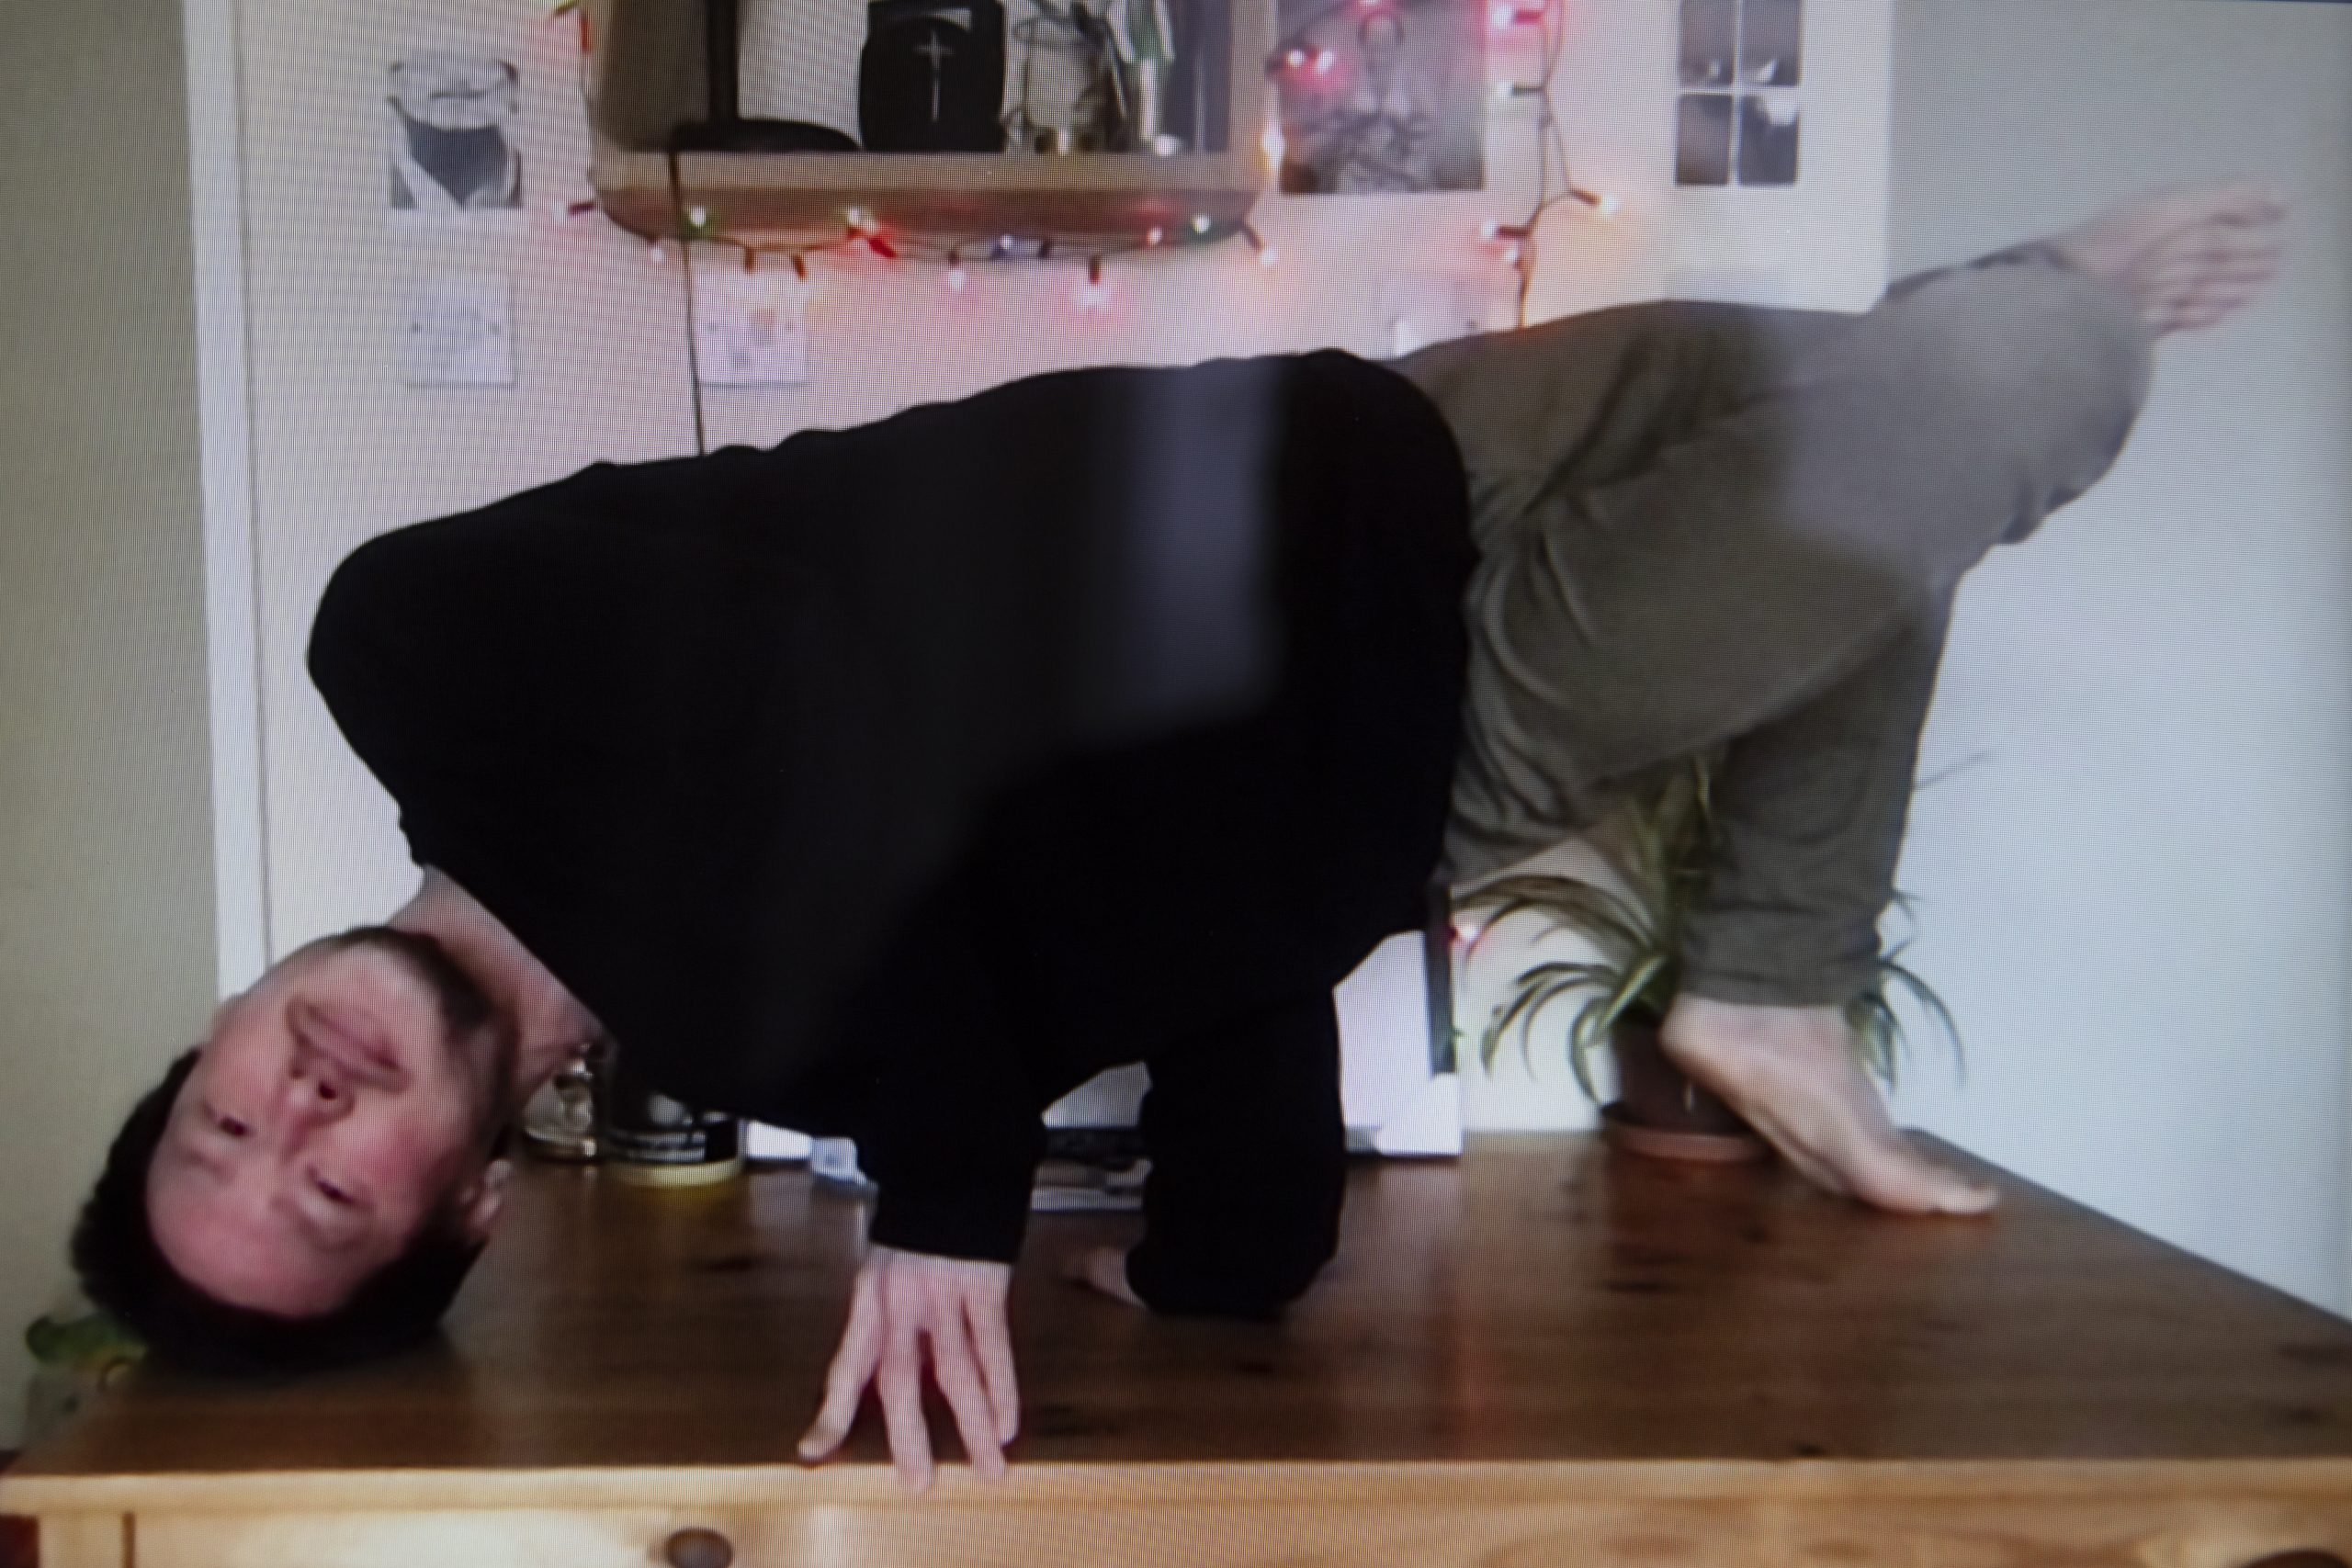 Si Rawlinson's full body is visible as he twists horizontally to balance on a table, supporting himself with his hands and one foot, with his other leg stretched upwards. His head is tipped upside down and rests on the table, he is looking into the camera with a calm expression.